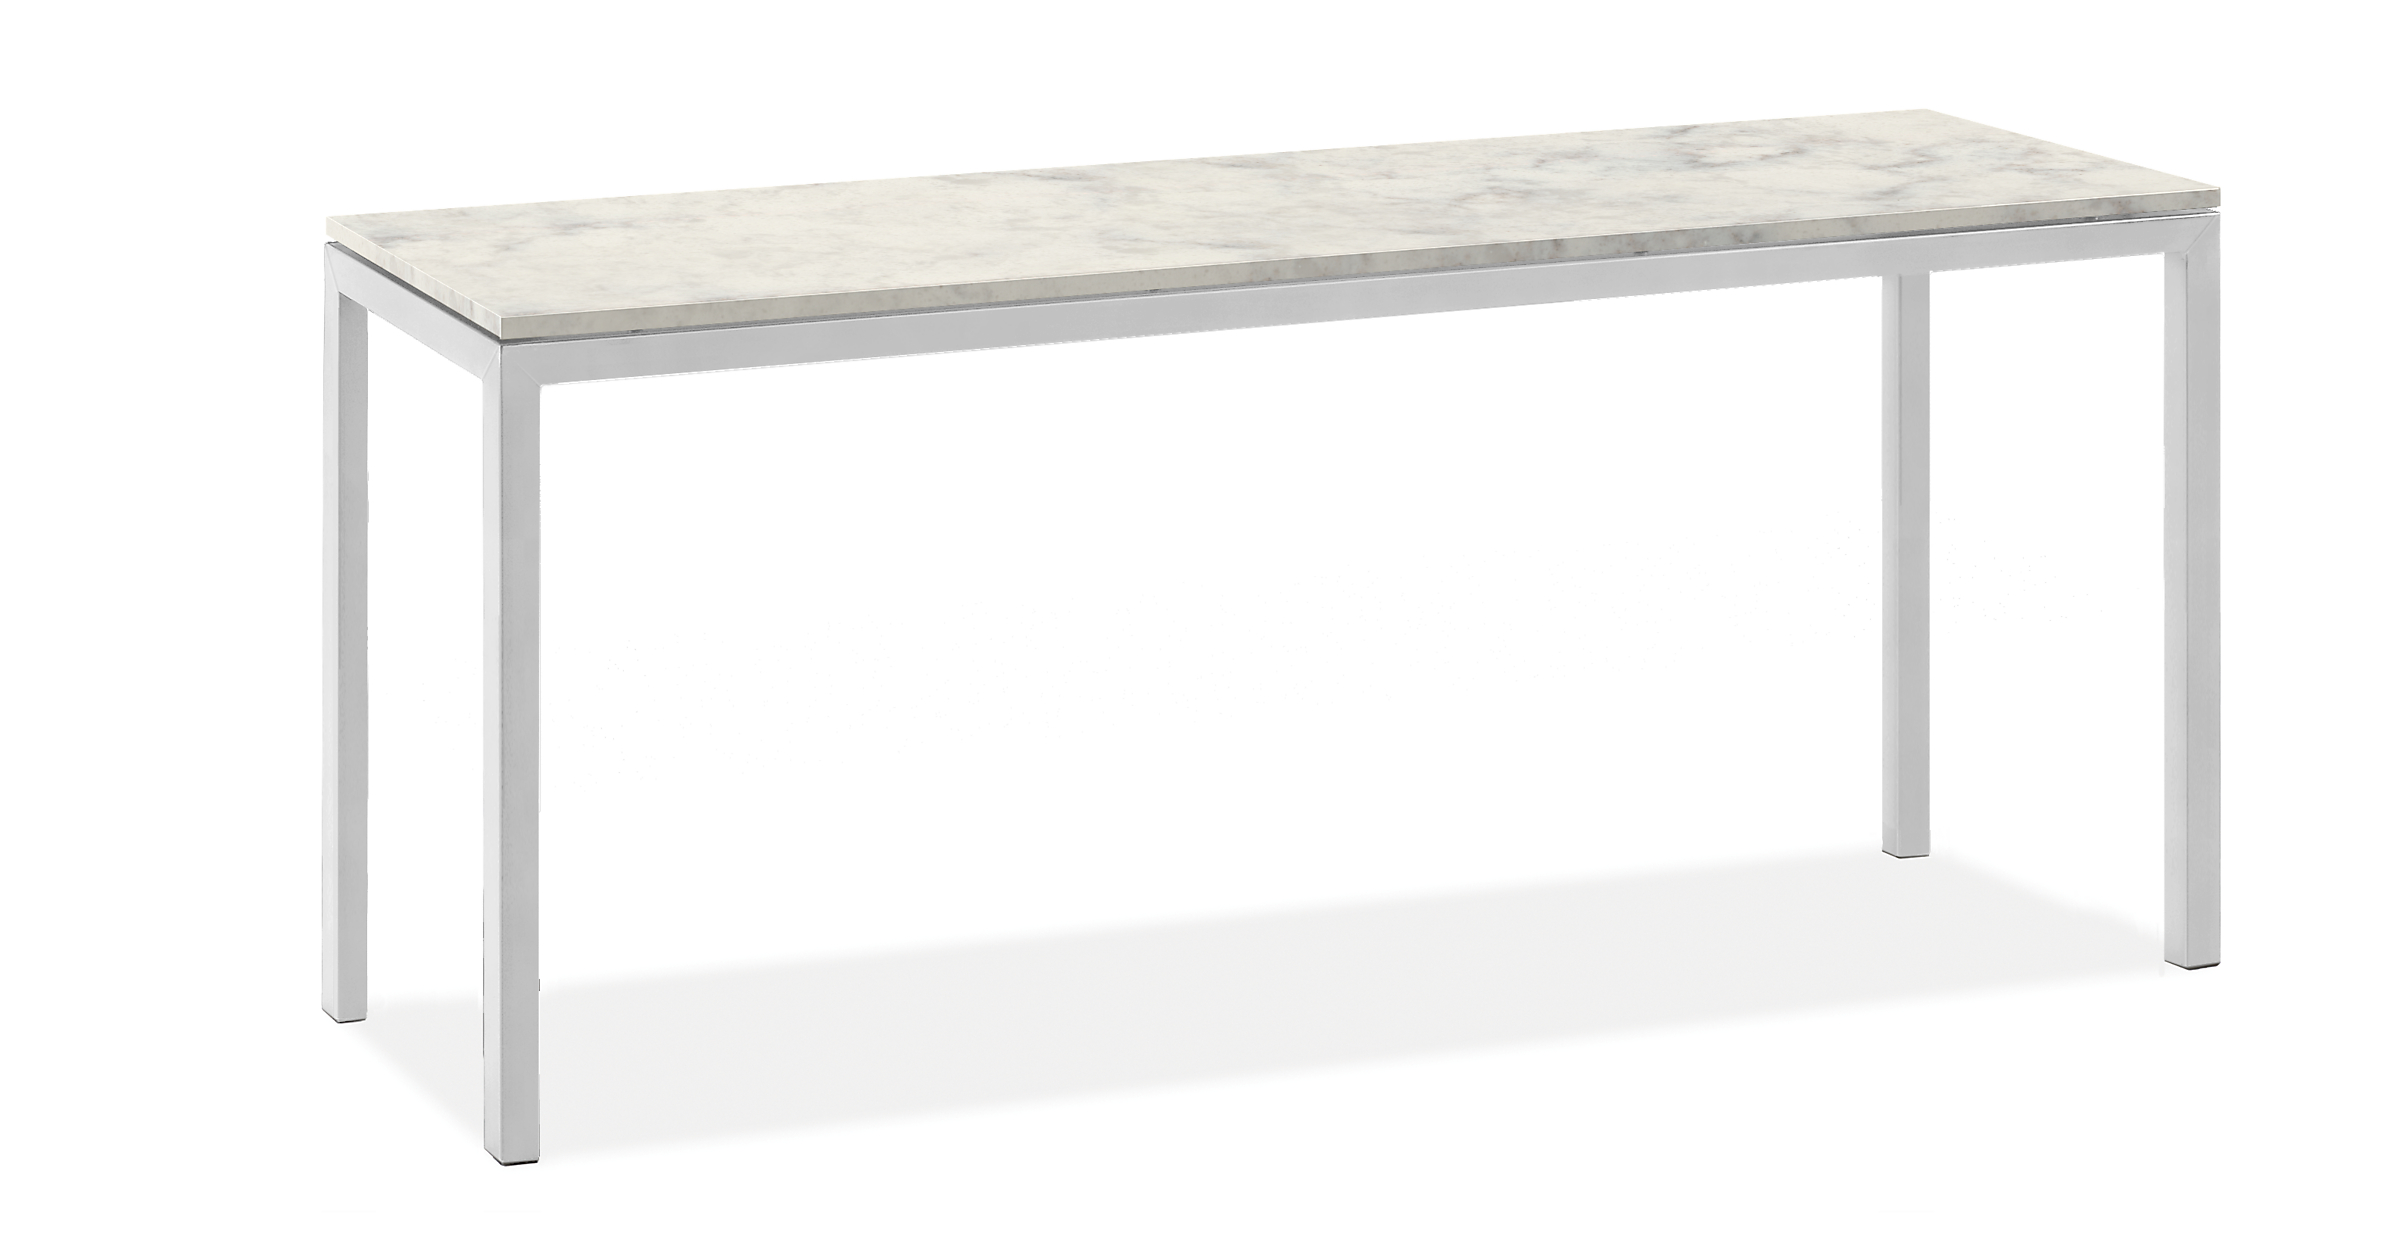 Parsons 54w 18d 29h Console Table with 1" Leg